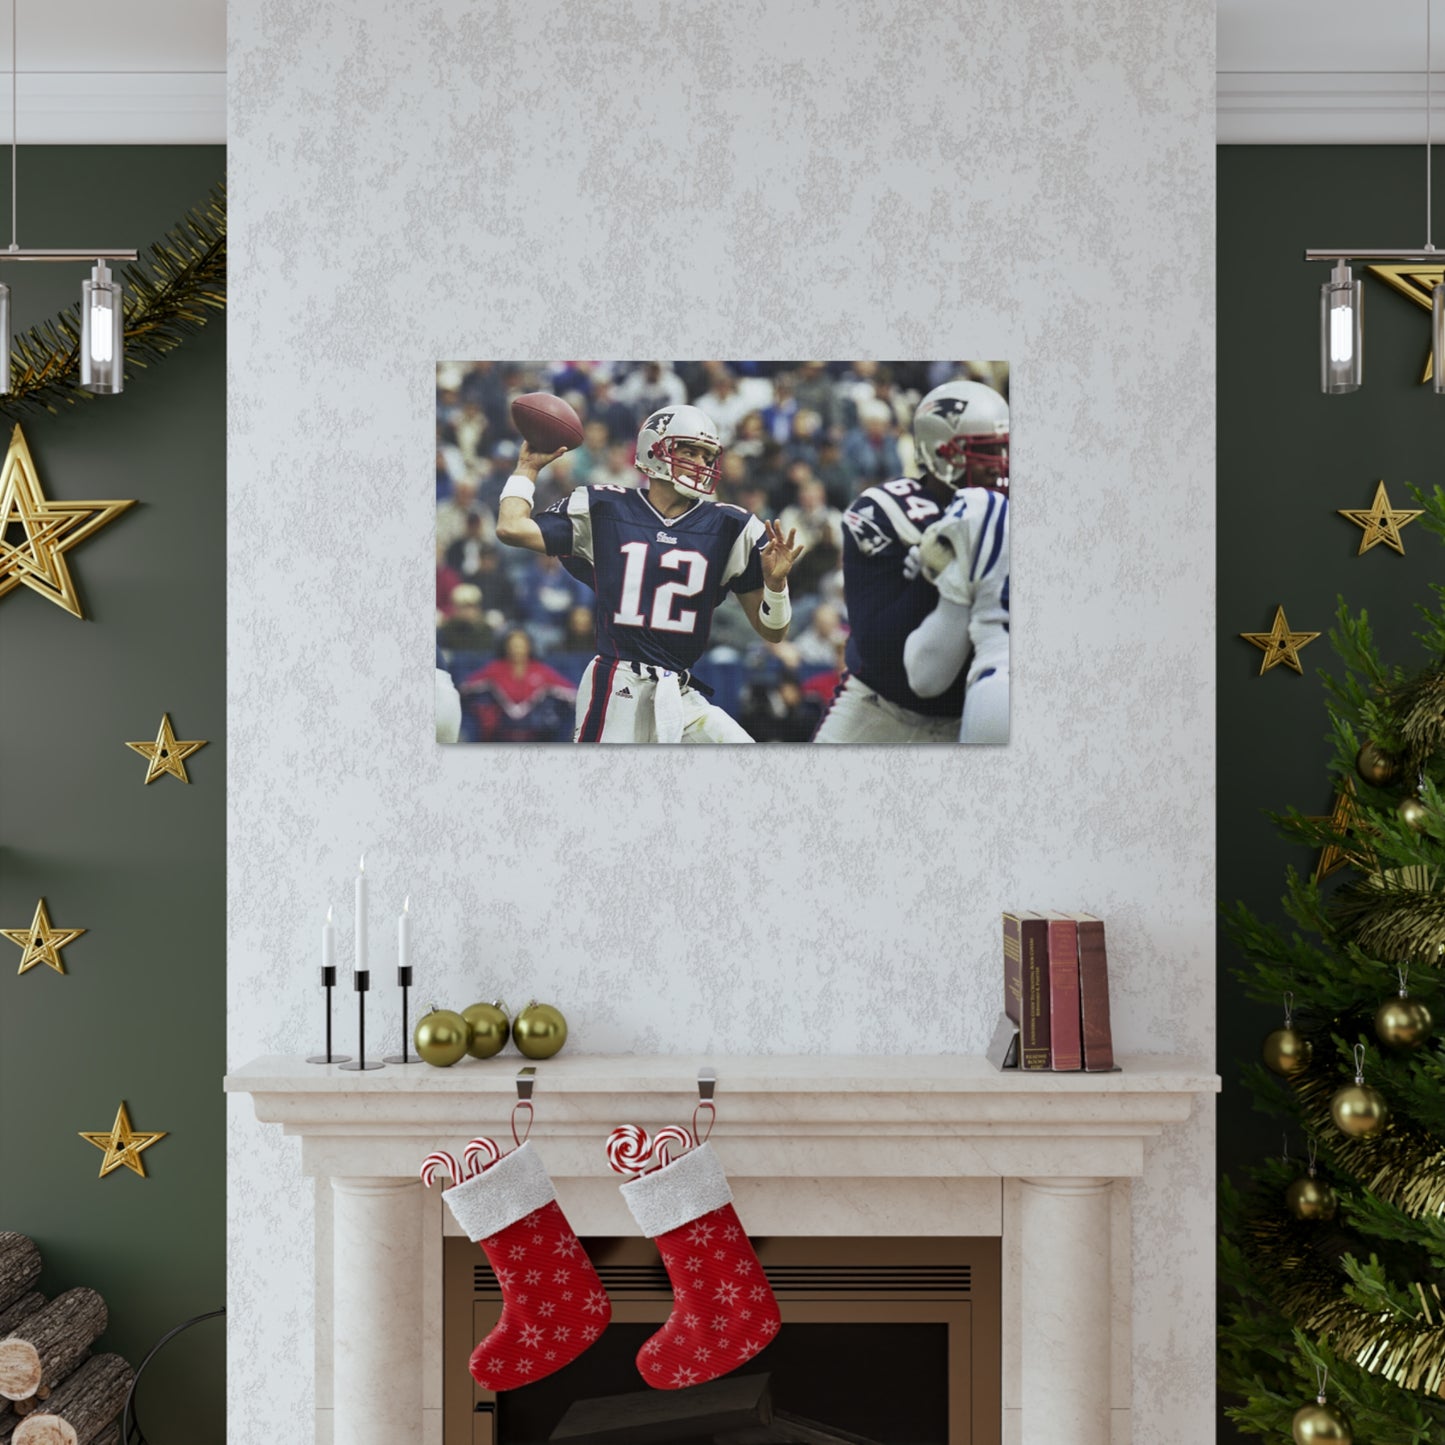 Tom Brady Making A Play With The New England Patriots Canvas Wall Art